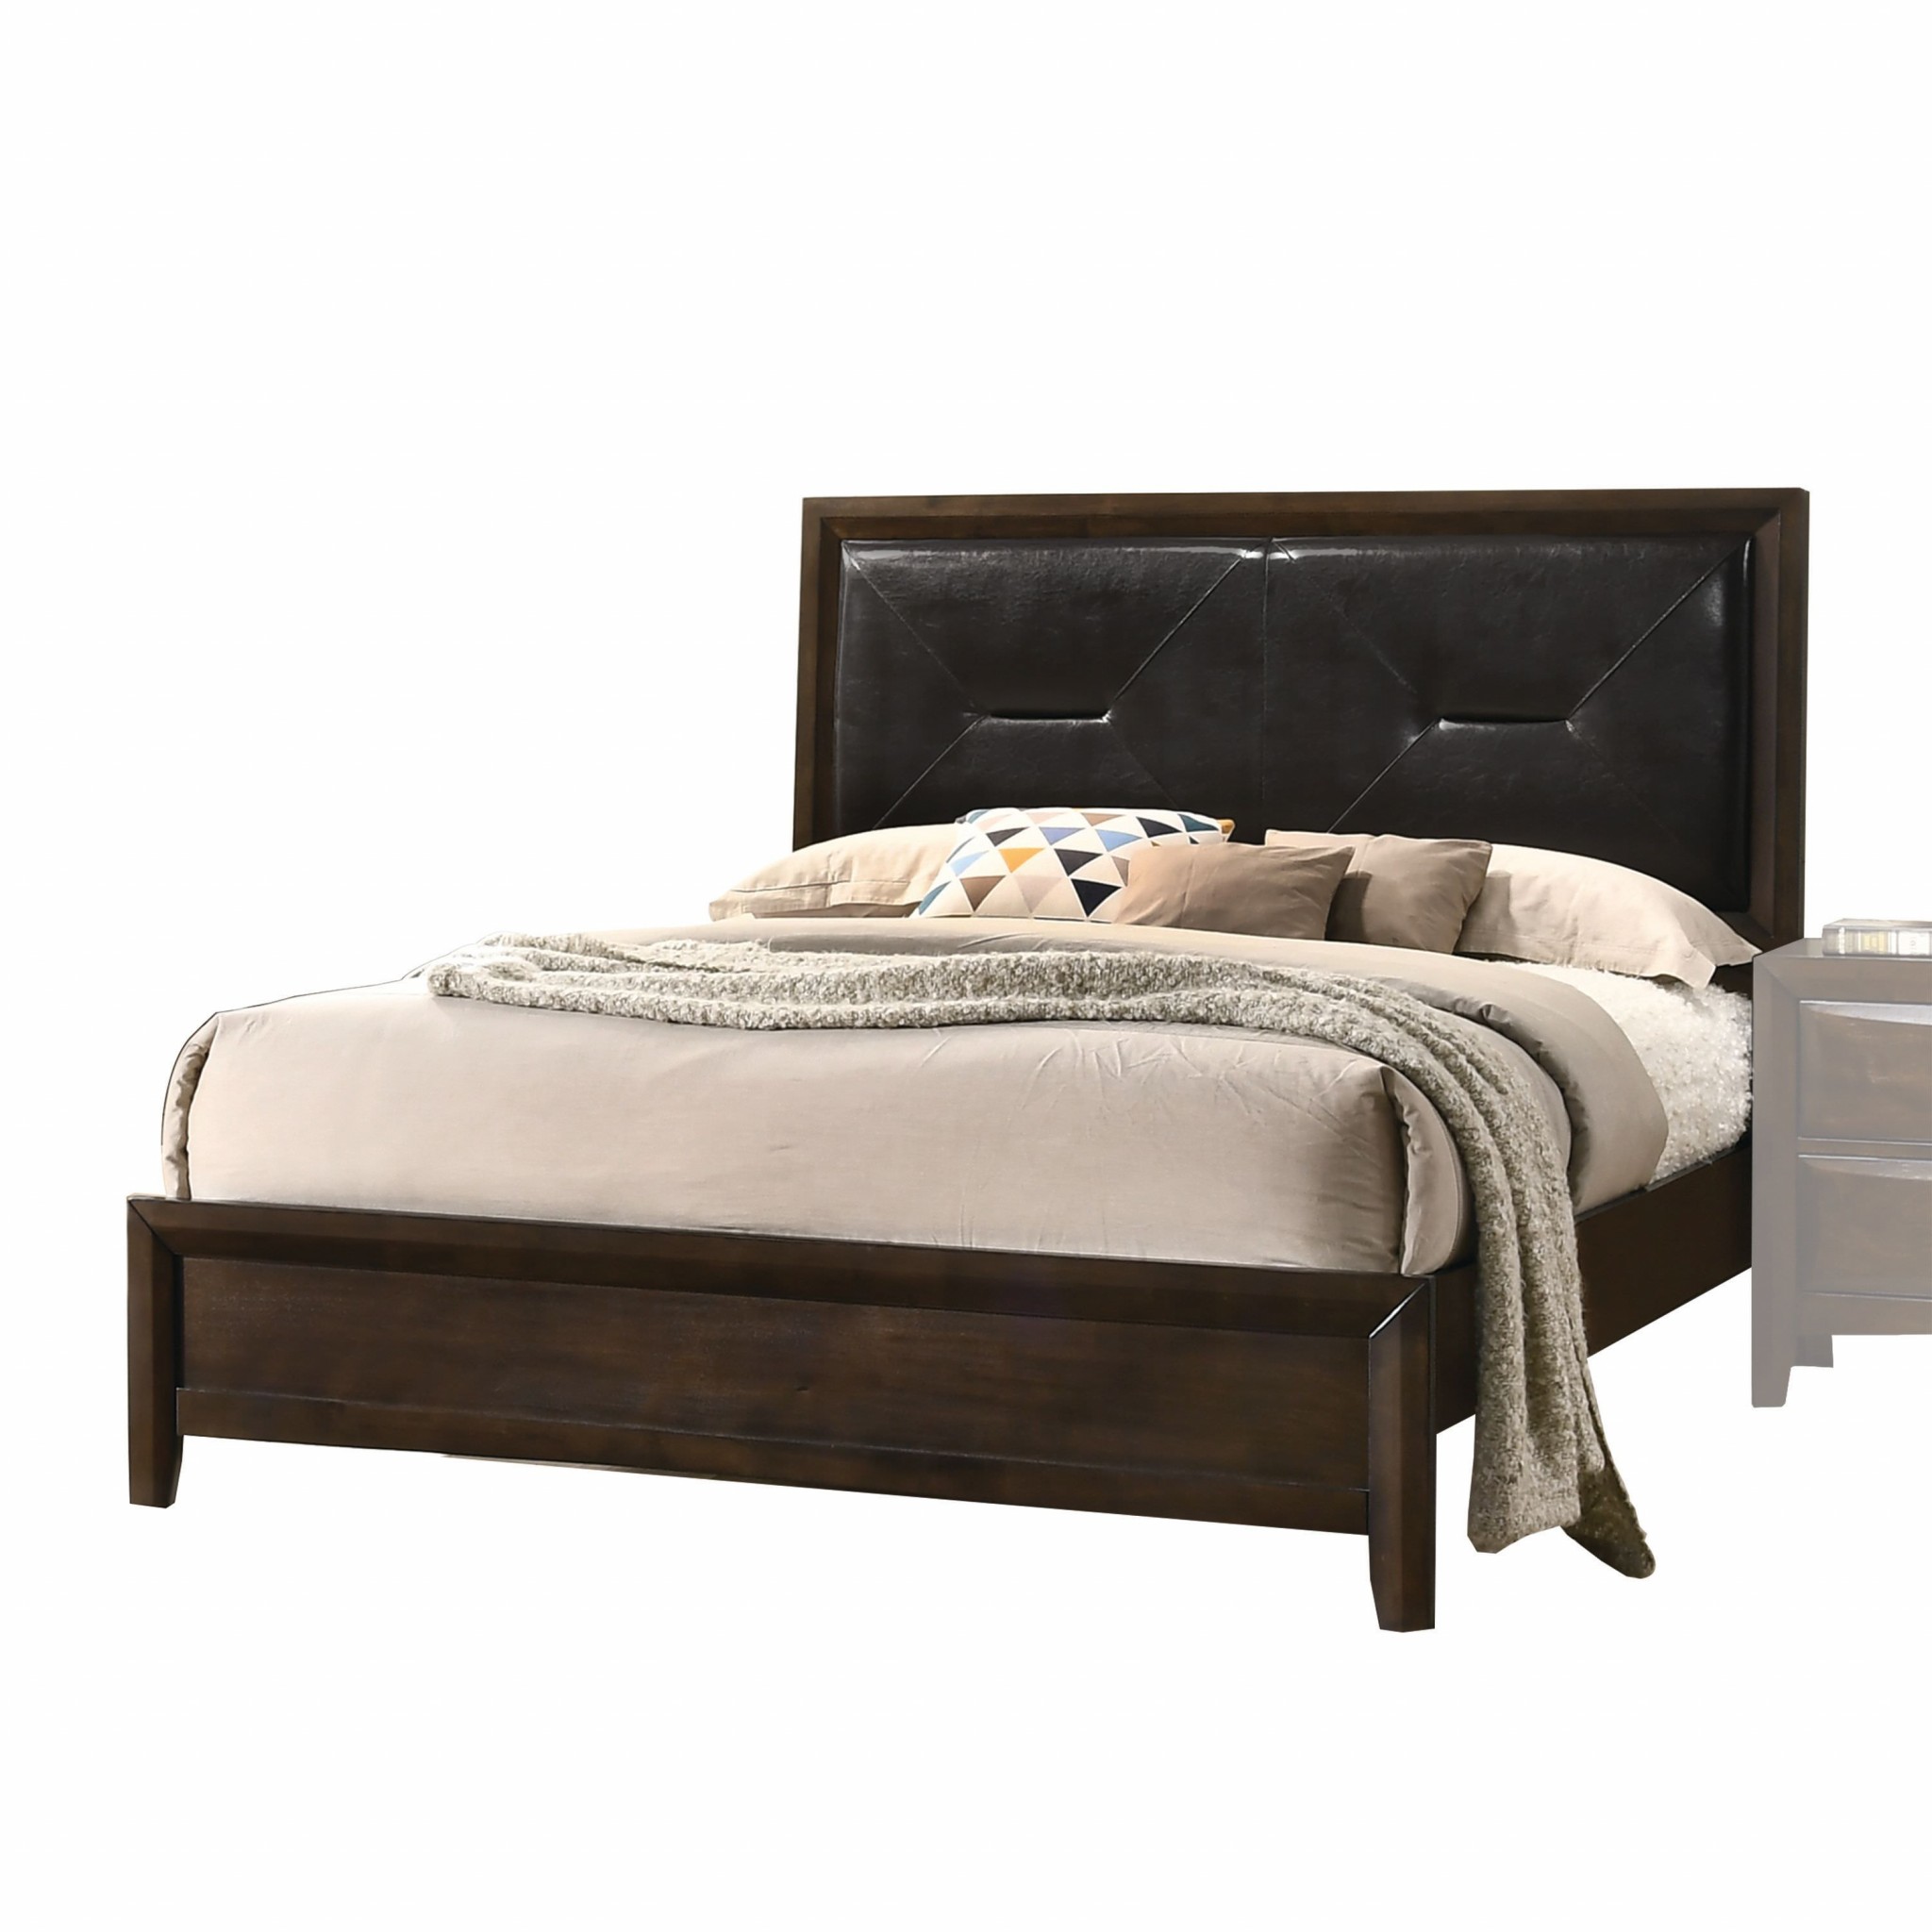 64" X 83" X 52" Black PU Walnut Wood Upholstered HB Queen Bed